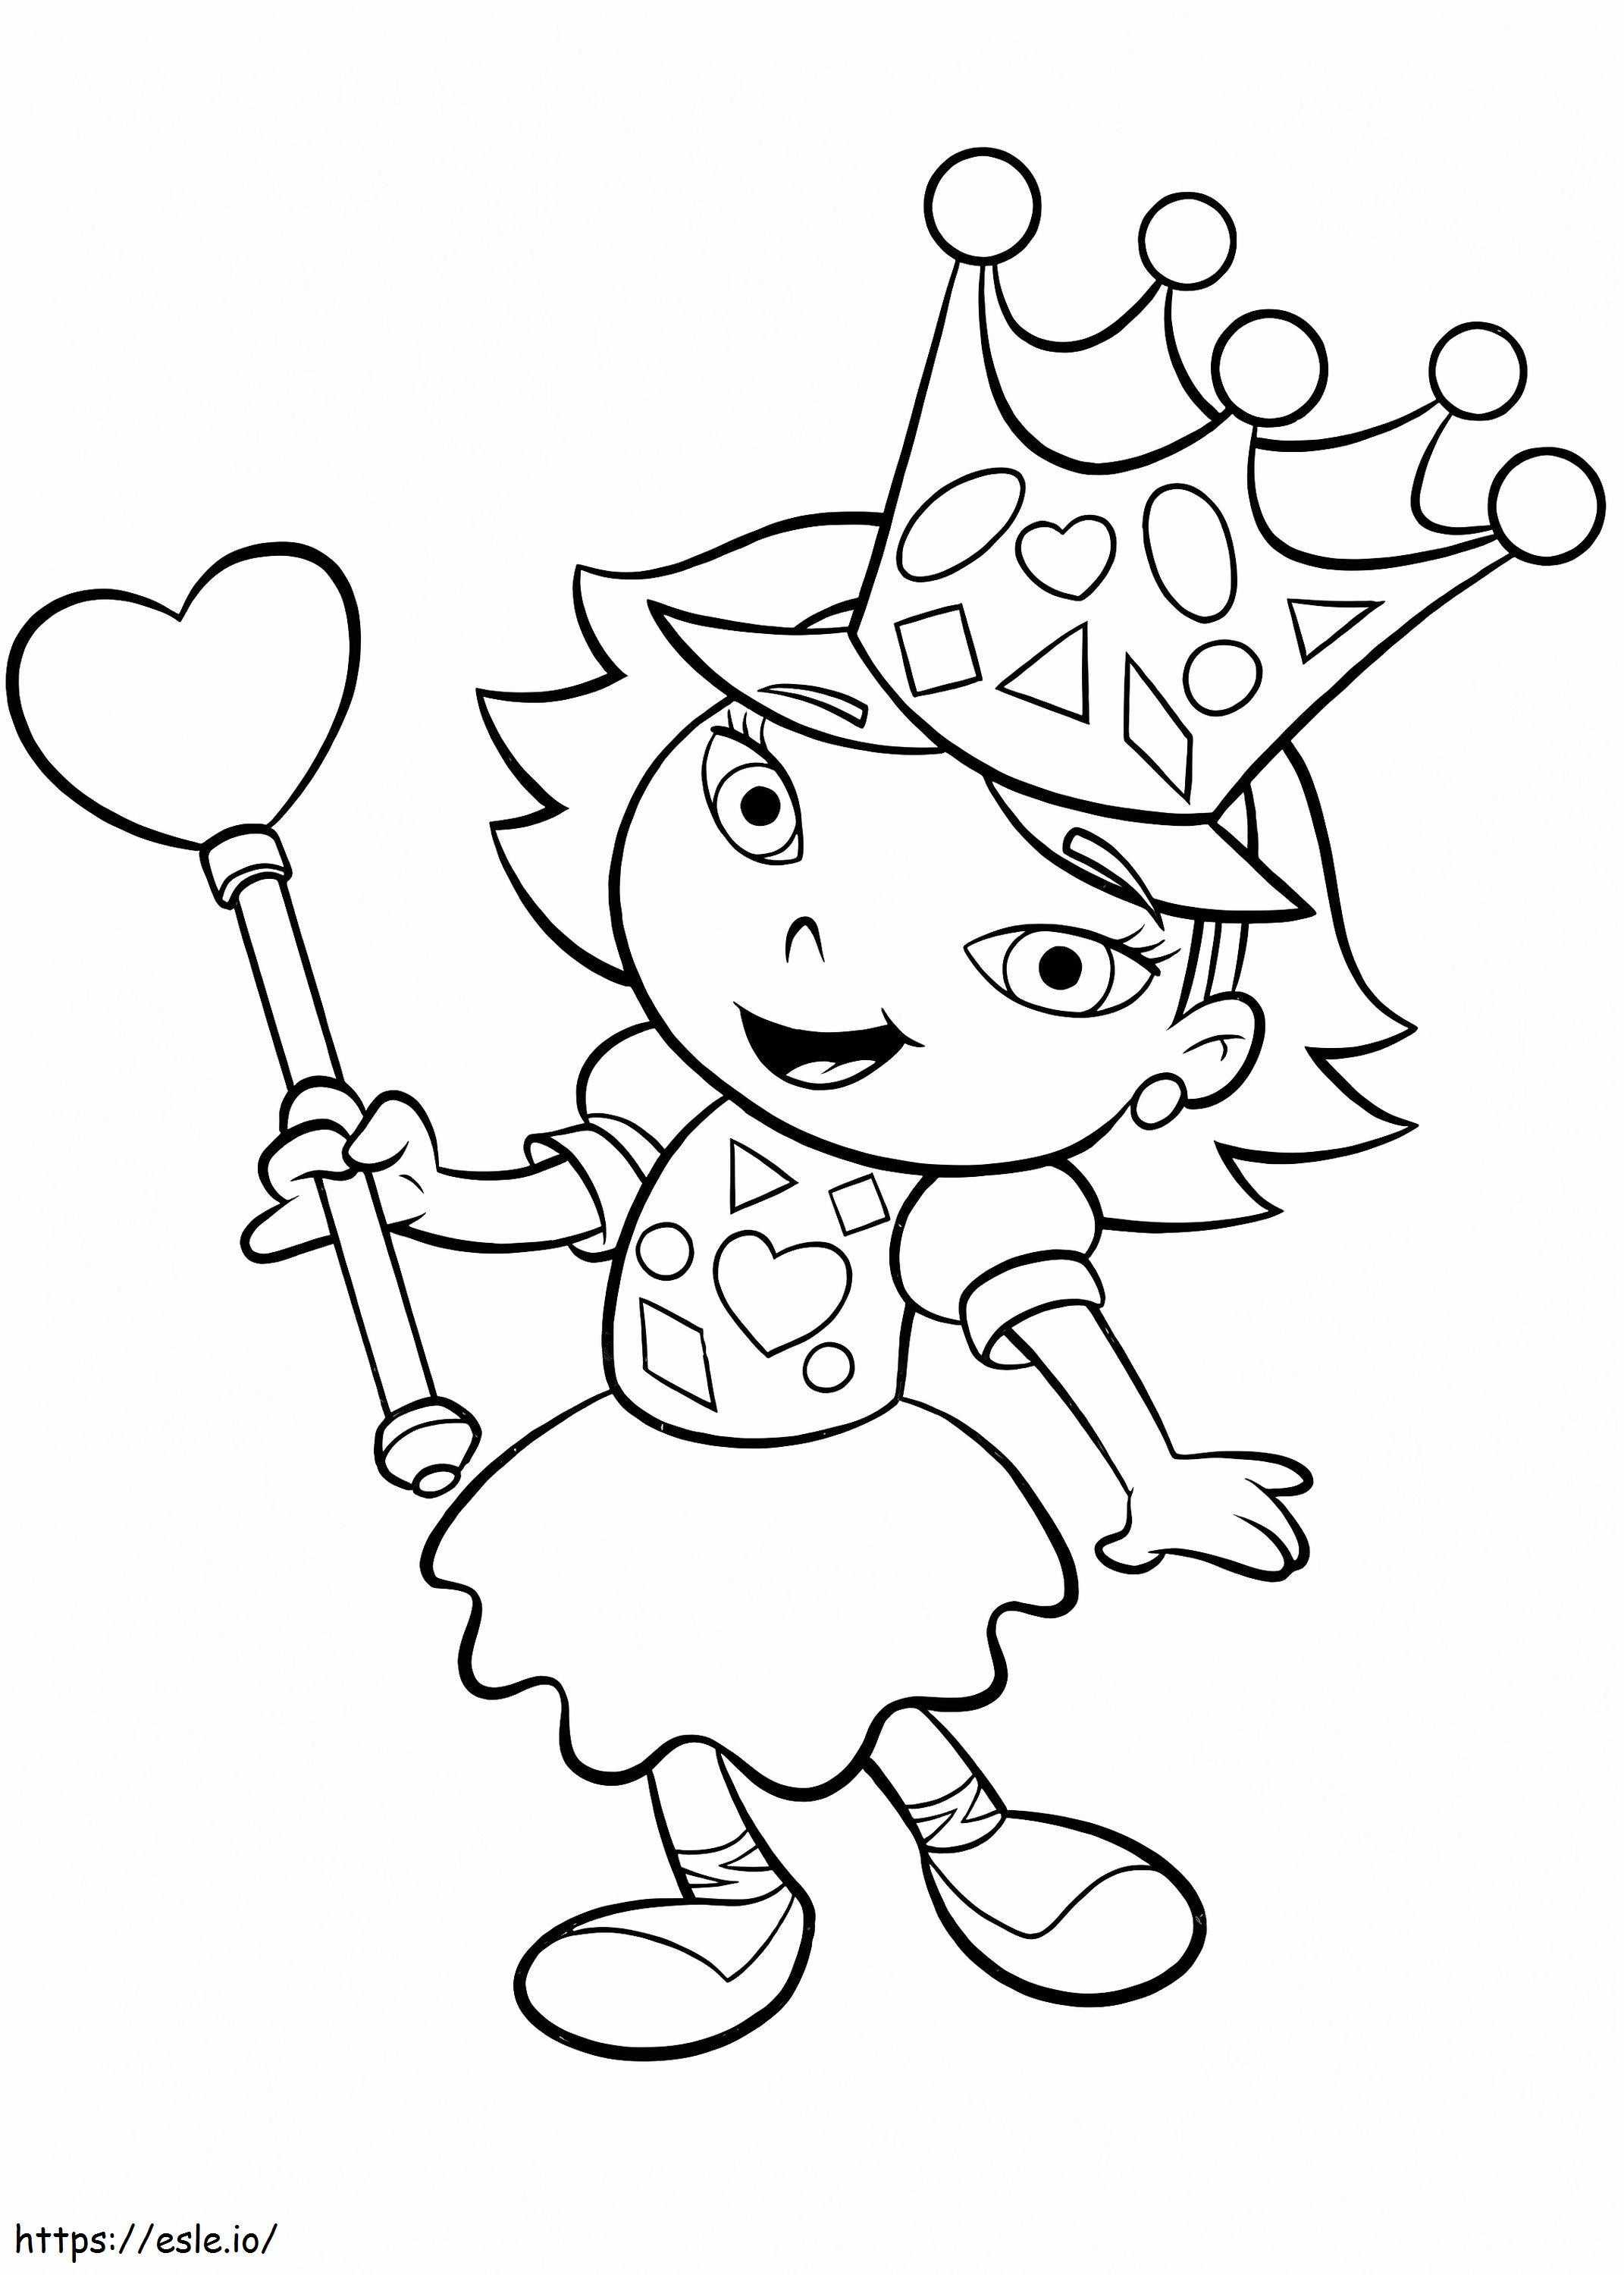 1536134832 June A4 coloring page